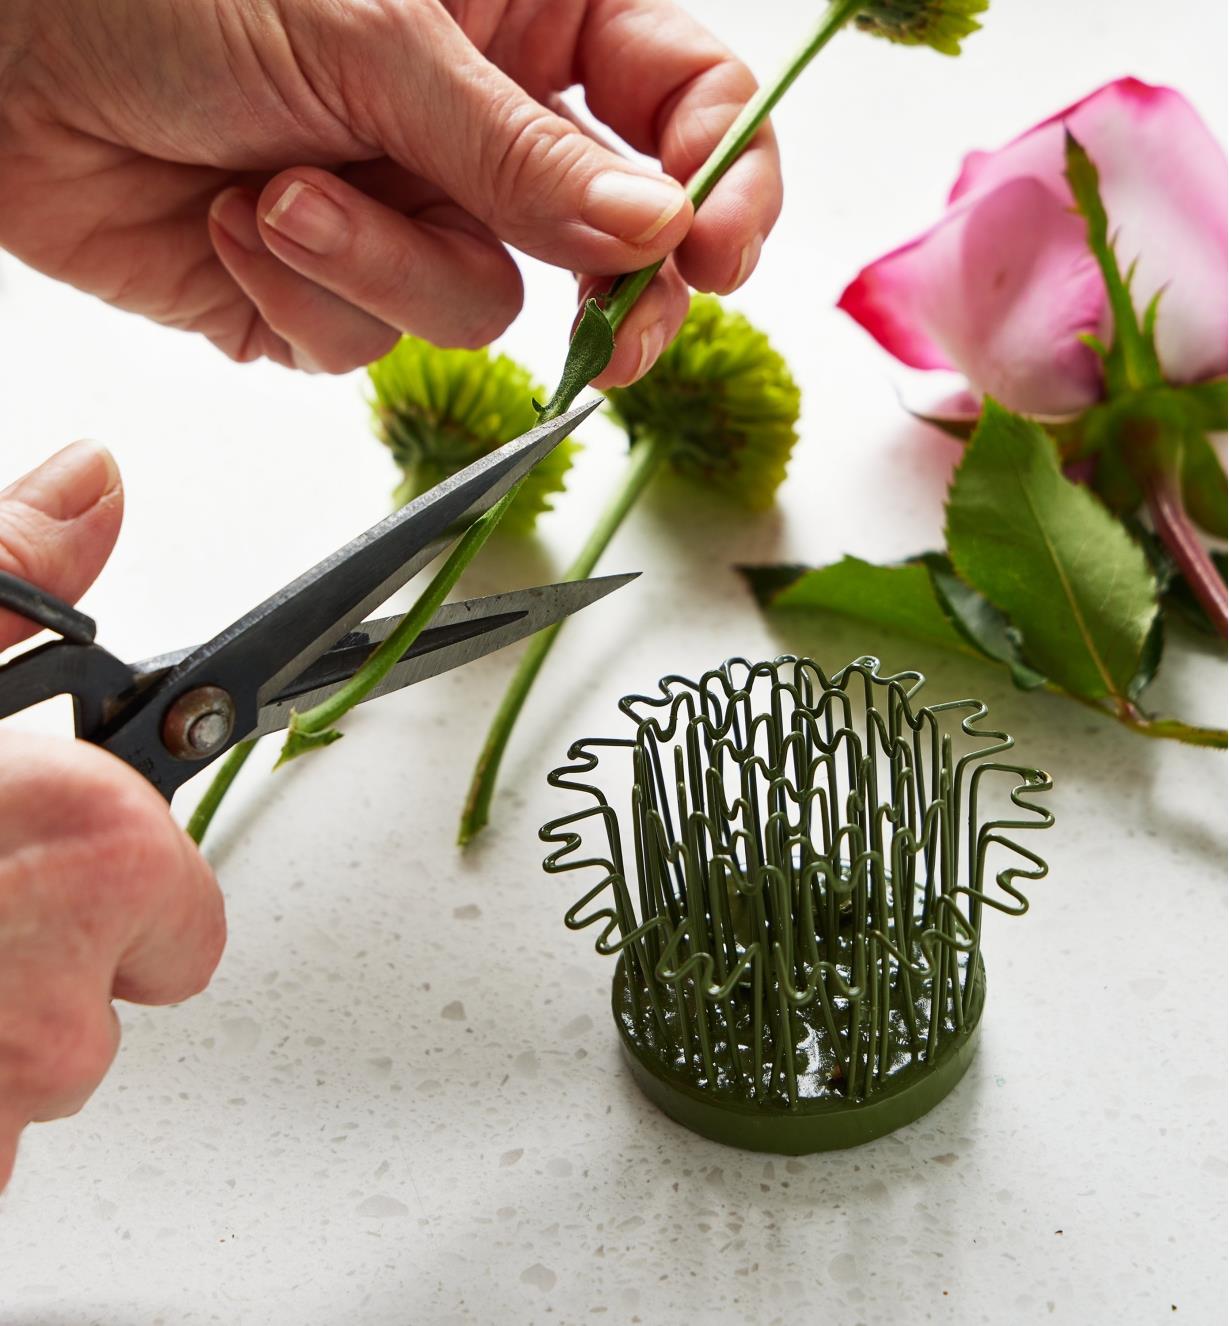 The Blue Ribbon flower holder sits on a table while someone trims the stem on a flower